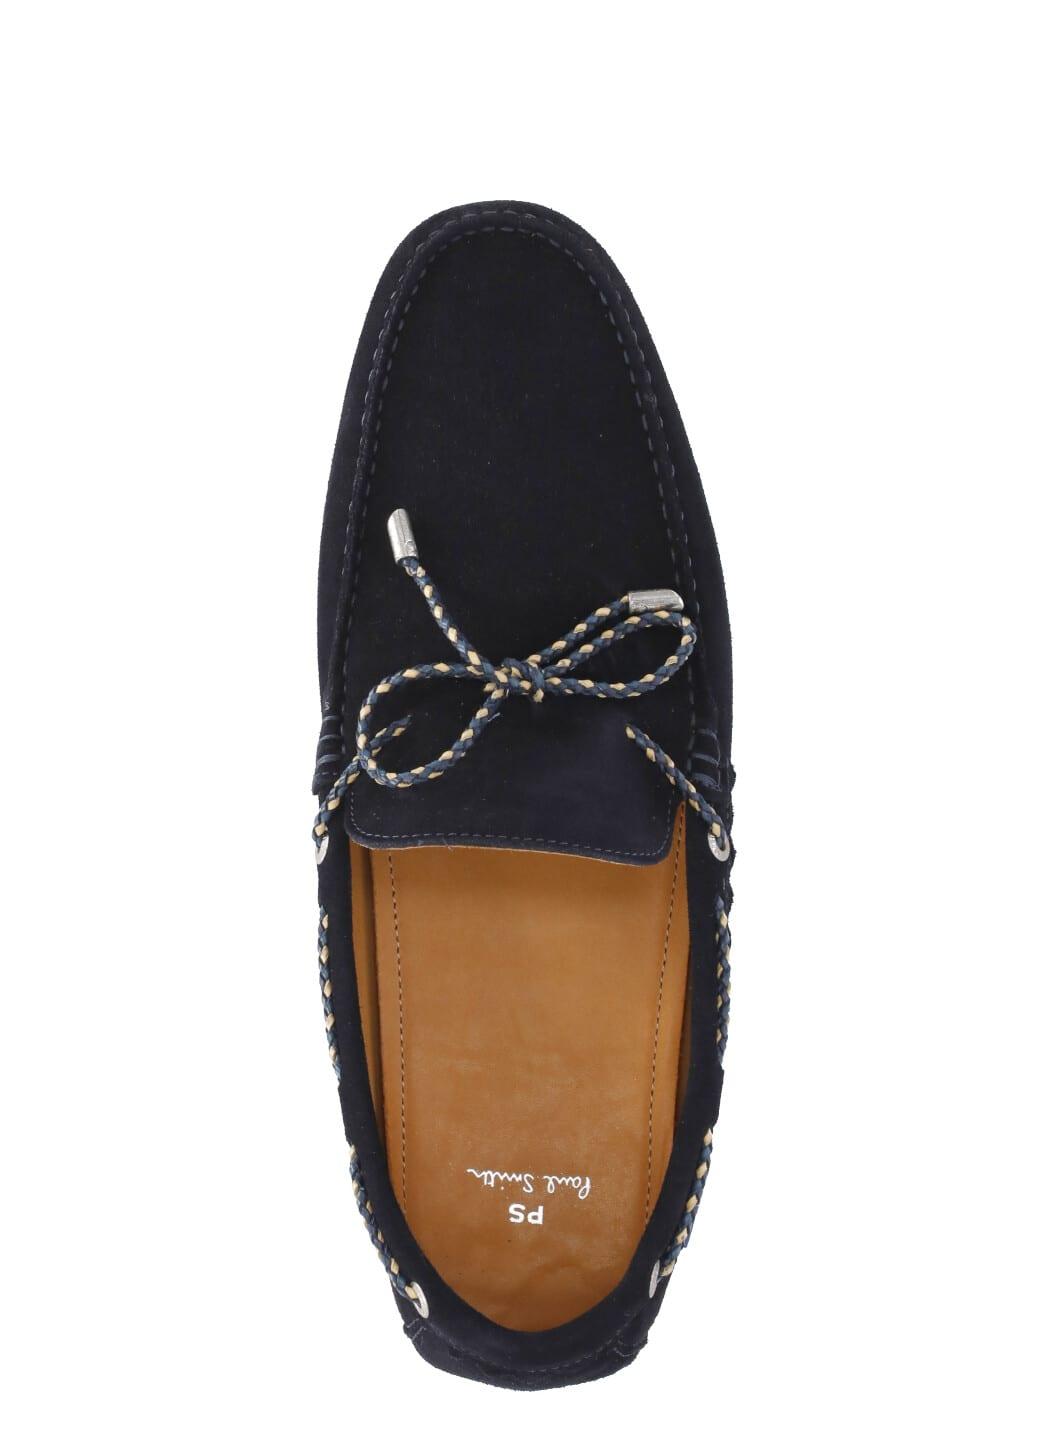 Paul Smith Springfield Suede Leather Loafers in Black for Men | Lyst